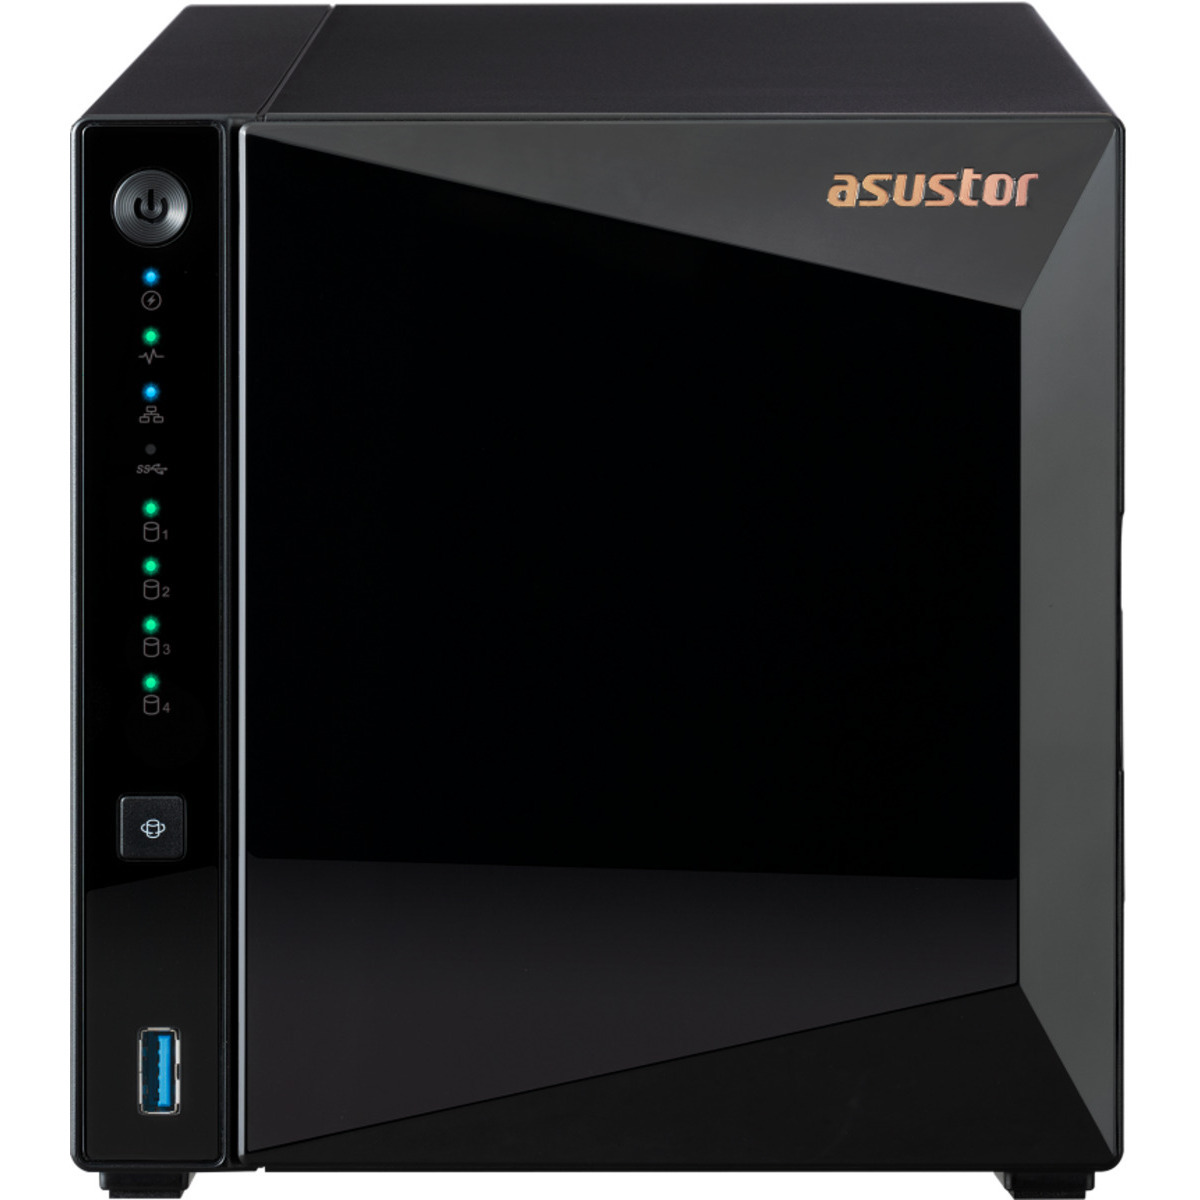 ASUSTOR DRIVESTOR 4 Pro AS3304T 32tb 4-Bay Desktop Personal / Basic Home / Small Office NAS - Network Attached Storage Device 4x8tb Toshiba Enterprise Capacity MG08ADA800E 3.5 7200rpm SATA 6Gb/s HDD ENTERPRISE Class Drives Installed - Burn-In Tested DRIVESTOR 4 Pro AS3304T